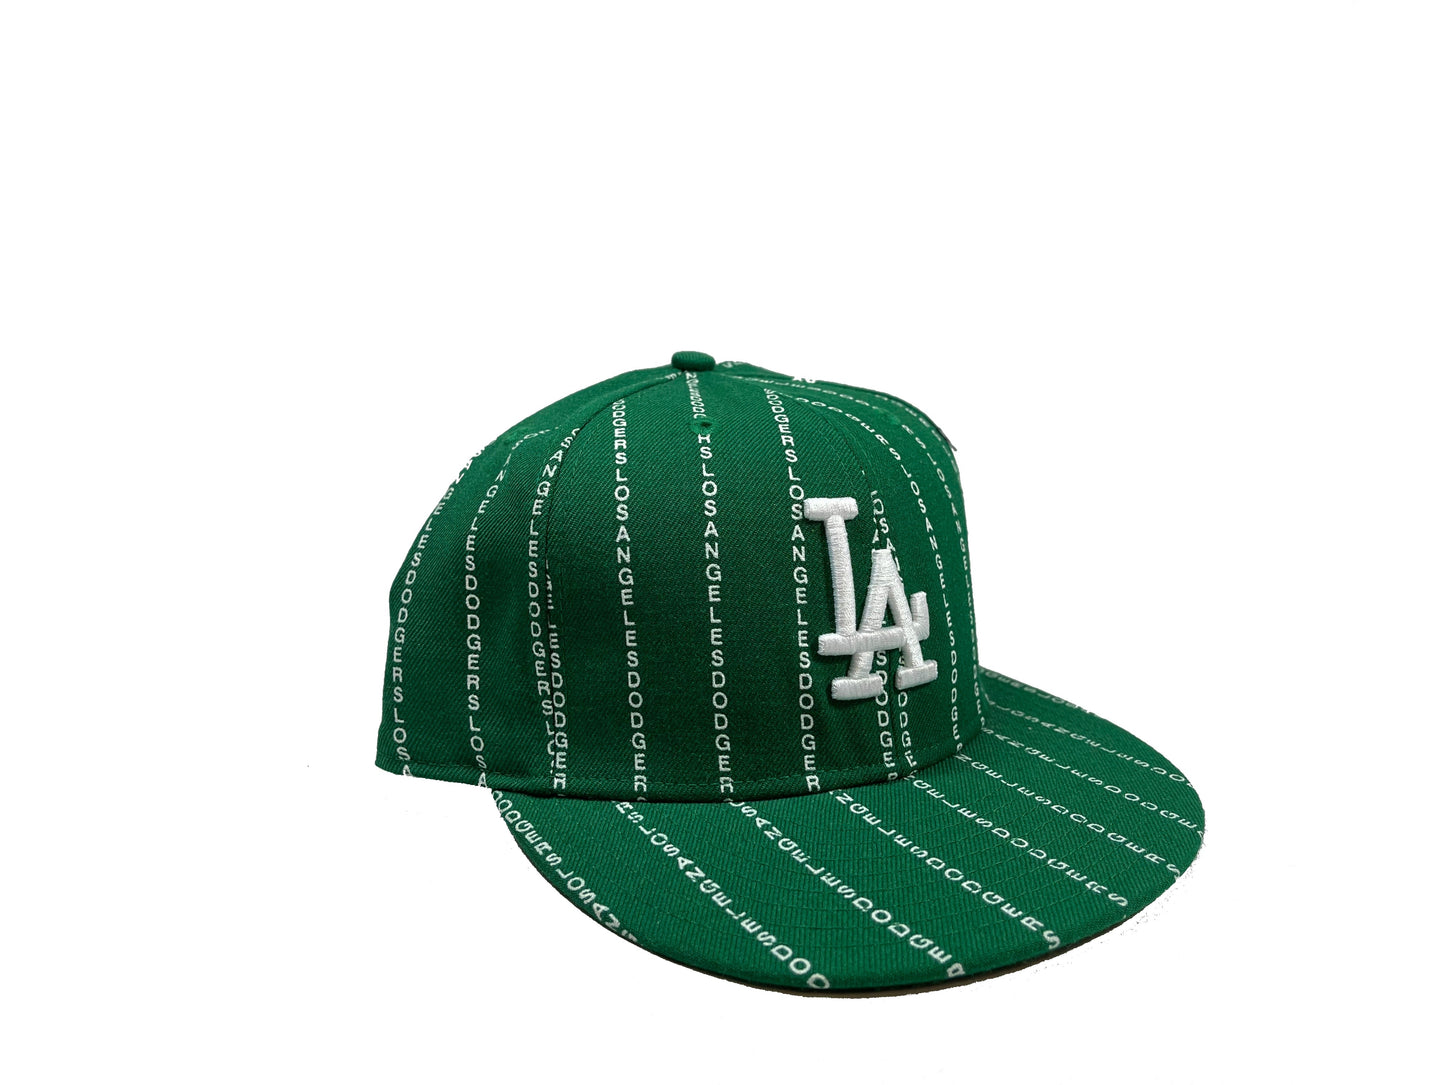 Los Angeles Dodgers Matrix (Green) Fitted